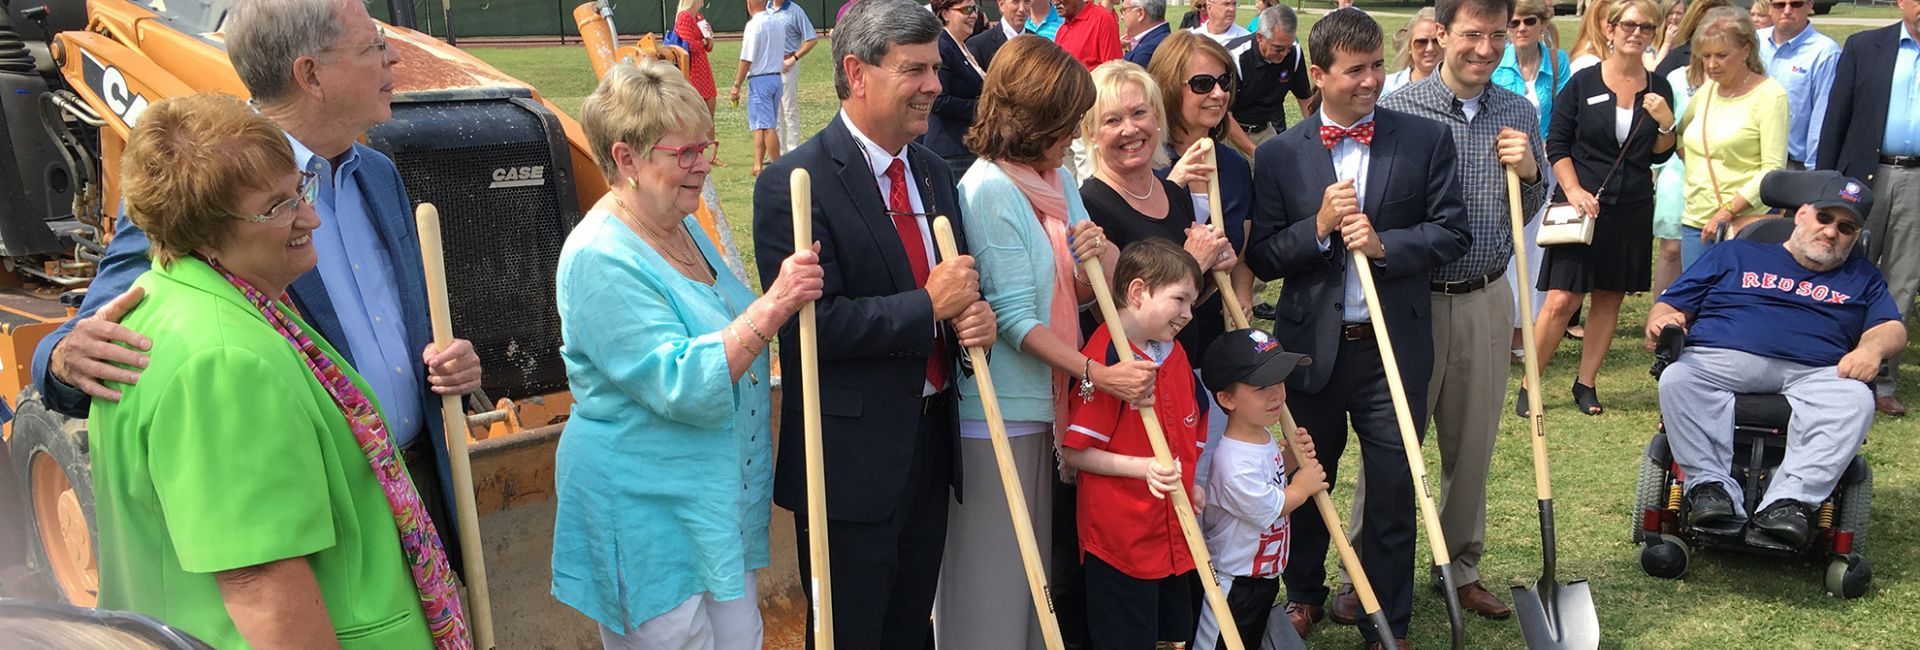 Featured image of Group of people holding shovels smiling at opening of park